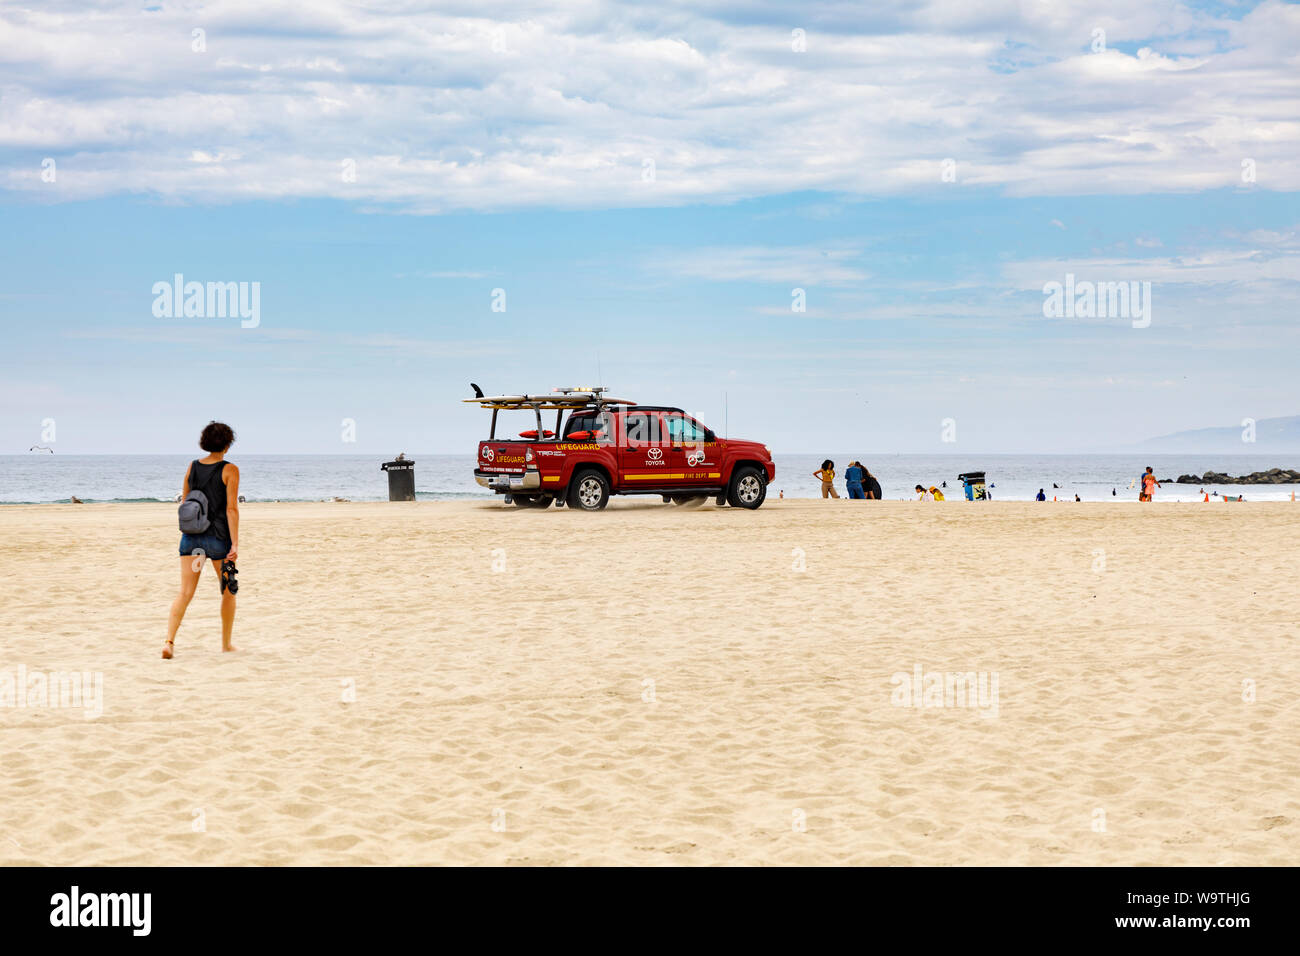 Lifeguard truck passing by on beach at Venice Stock Photo